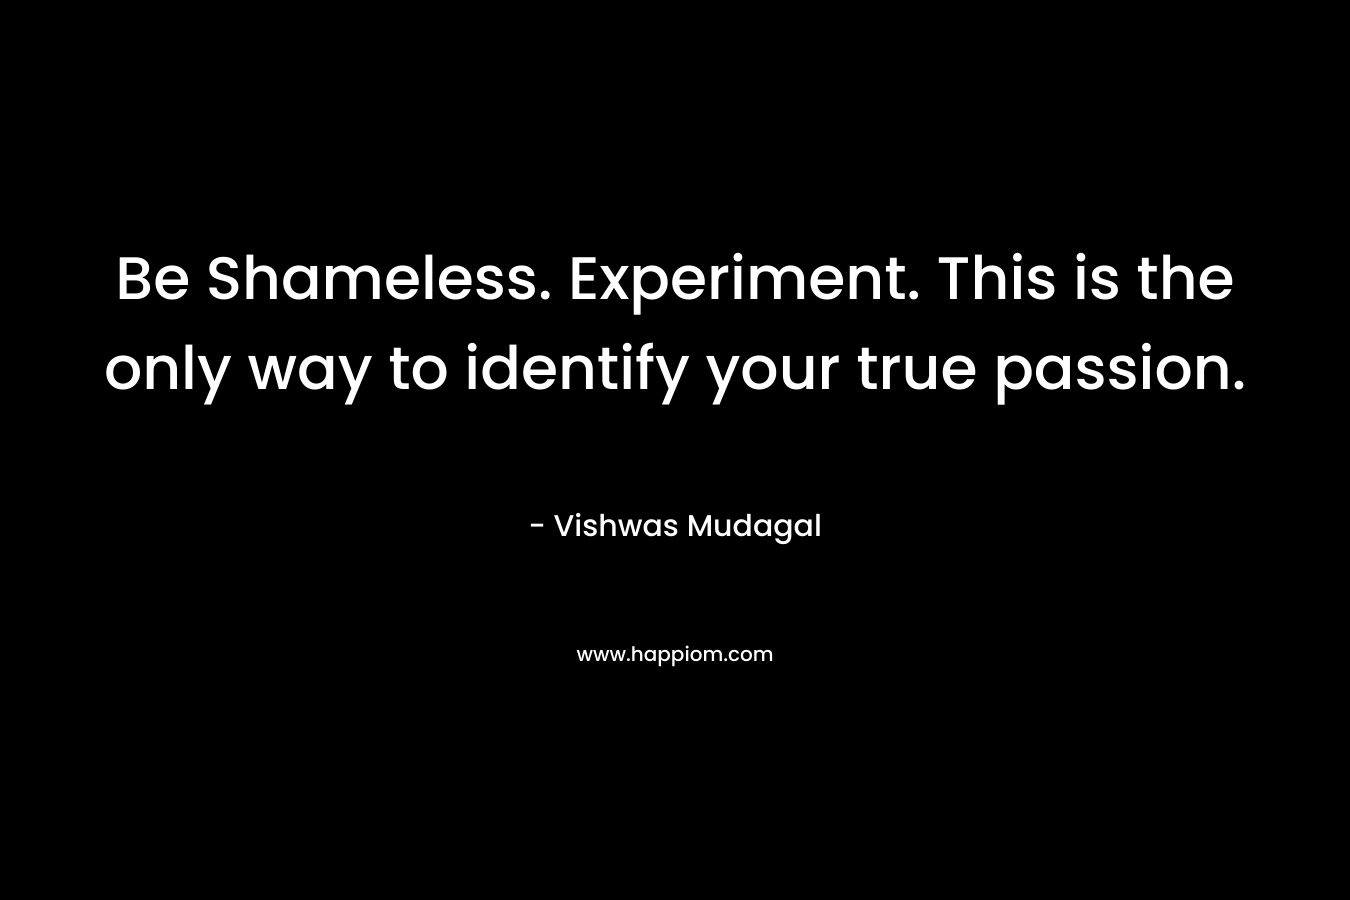 Be Shameless. Experiment. This is the only way to identify your true passion. – Vishwas Mudagal